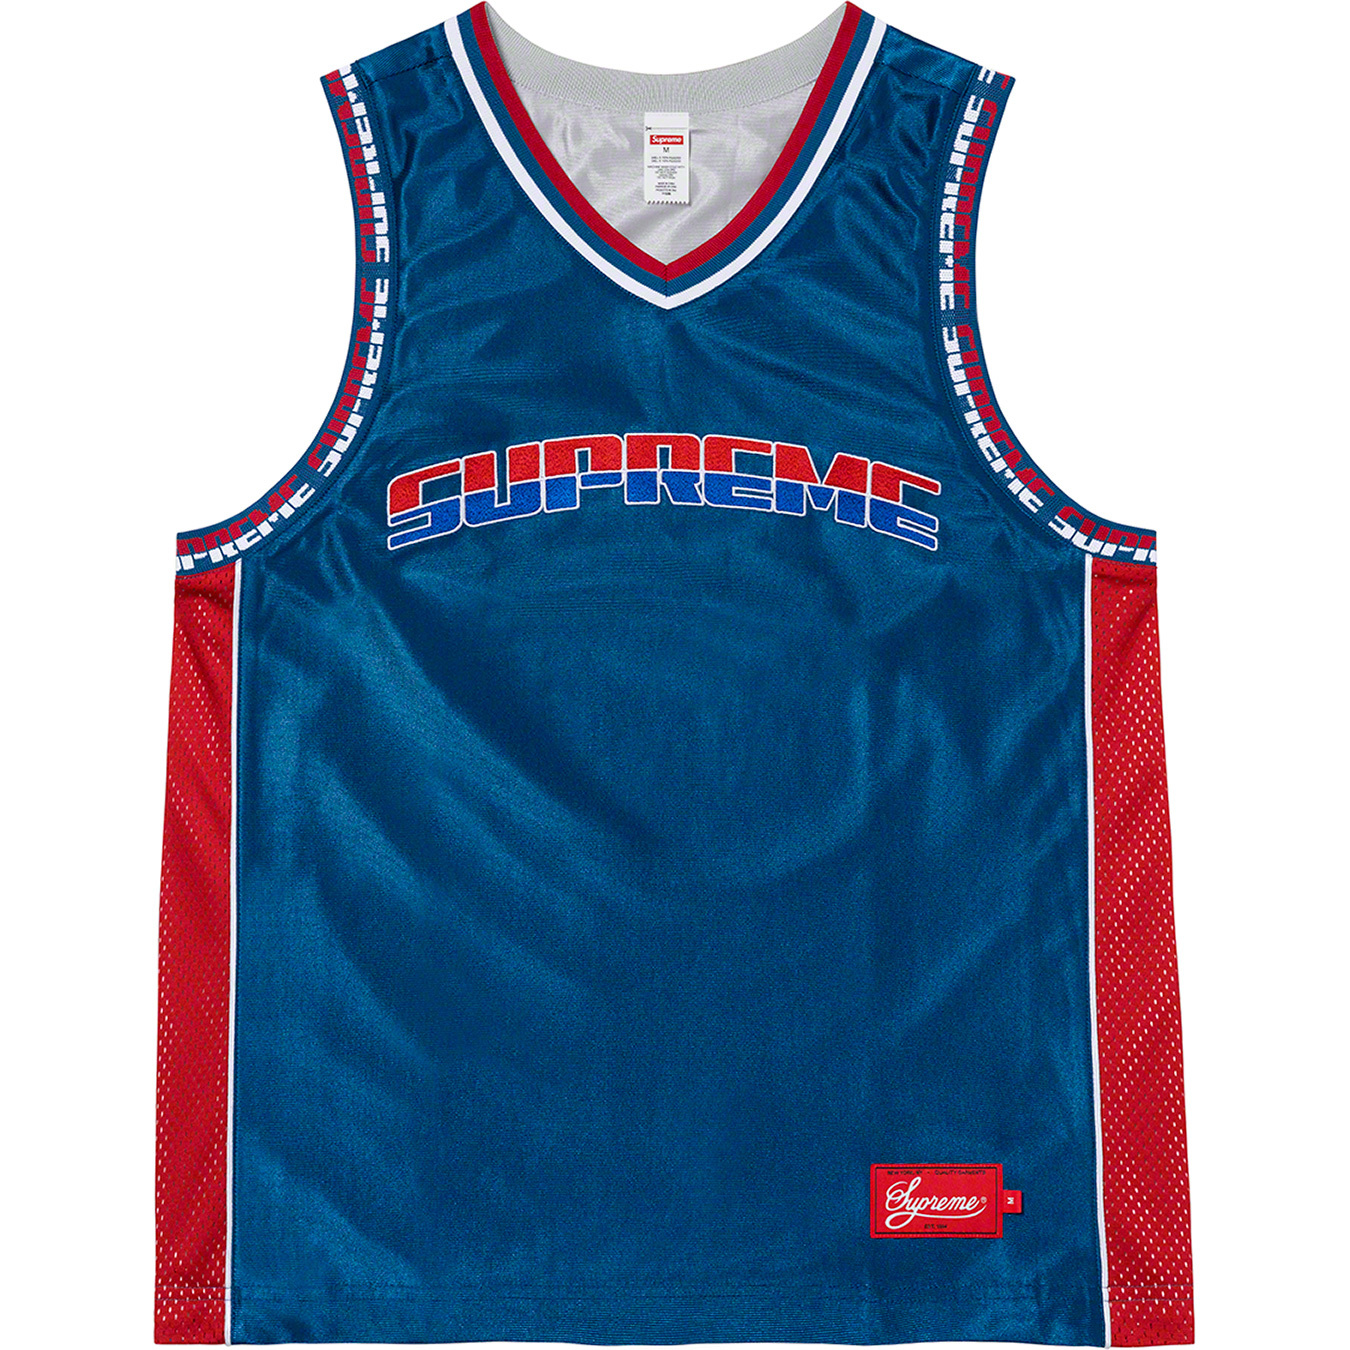 New SUPREME Red And Blue Reversible Basketball Jersey. Guaranteed Authentic  XL